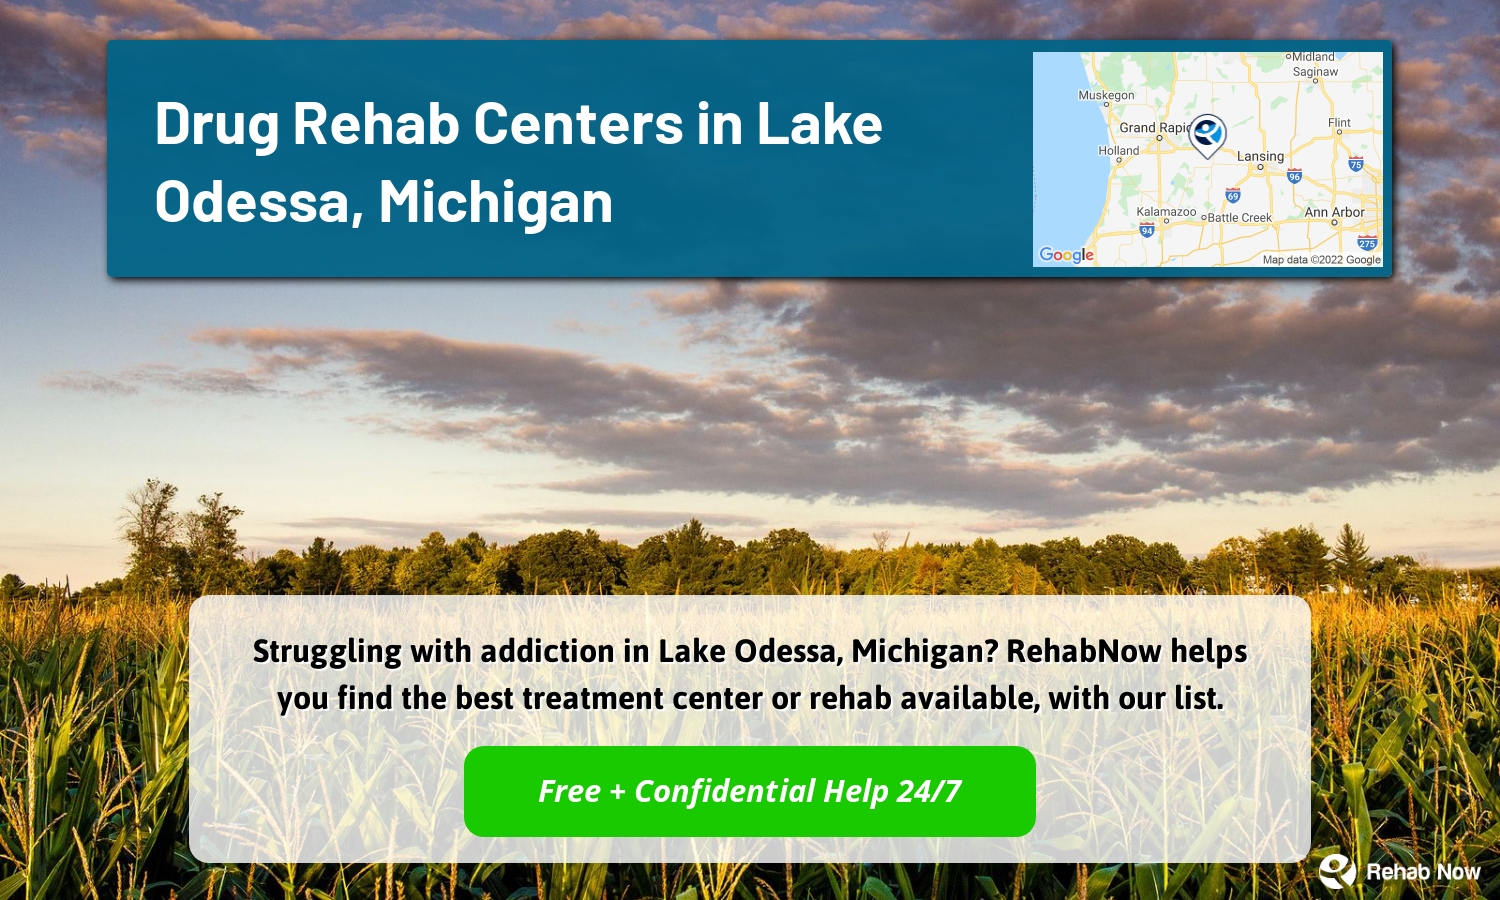 Struggling with addiction in Lake Odessa, Michigan? RehabNow helps you find the best treatment center or rehab available, with our list.